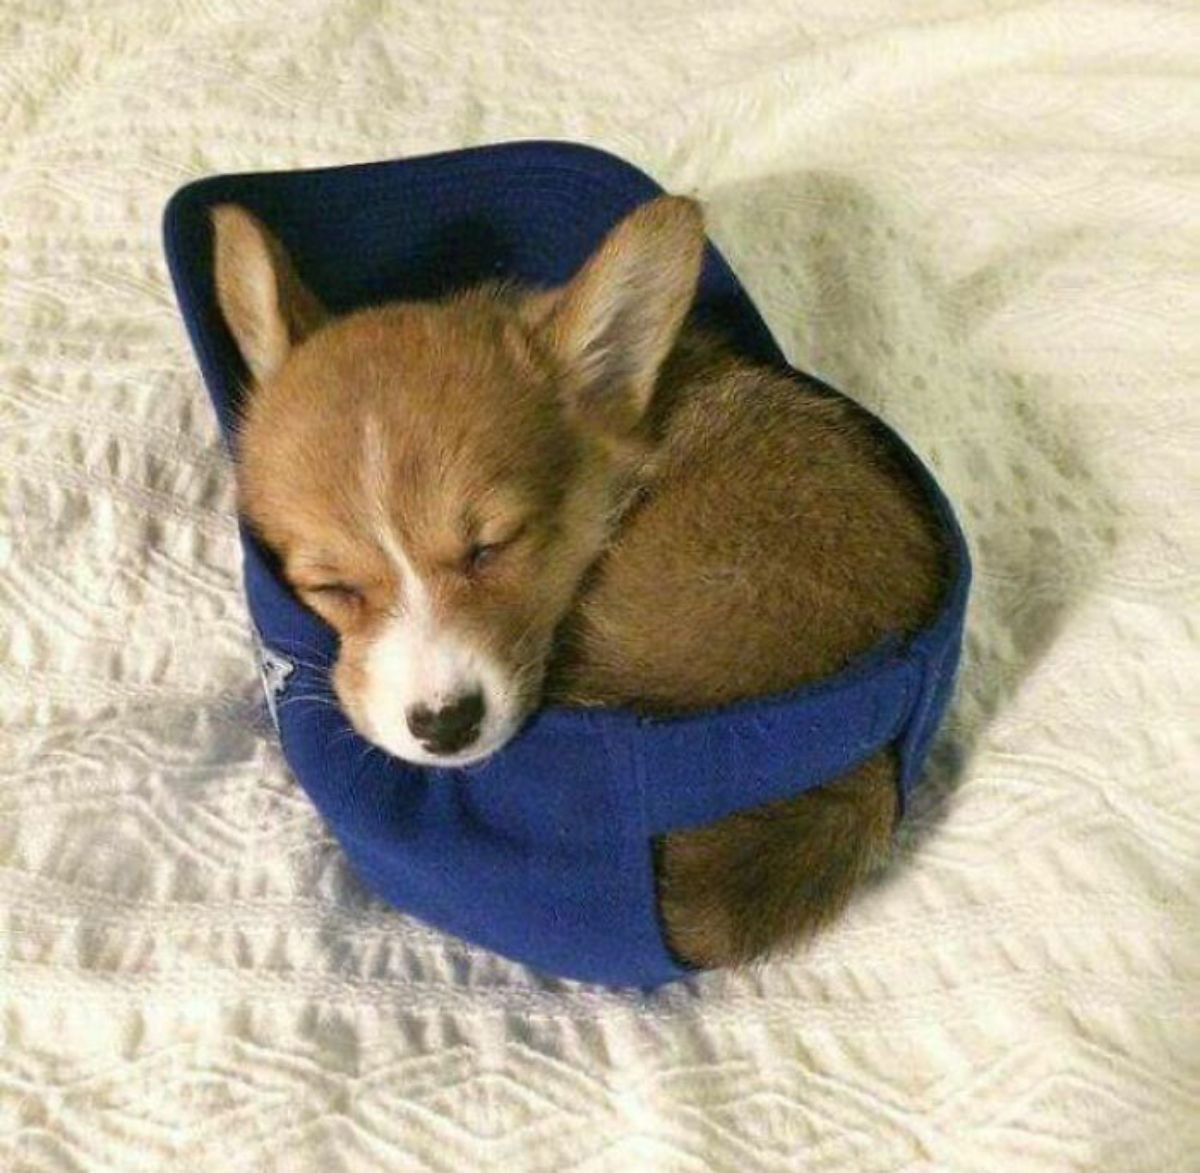 brown and white corgi puppy sleeping inside a blue cap on a white bed